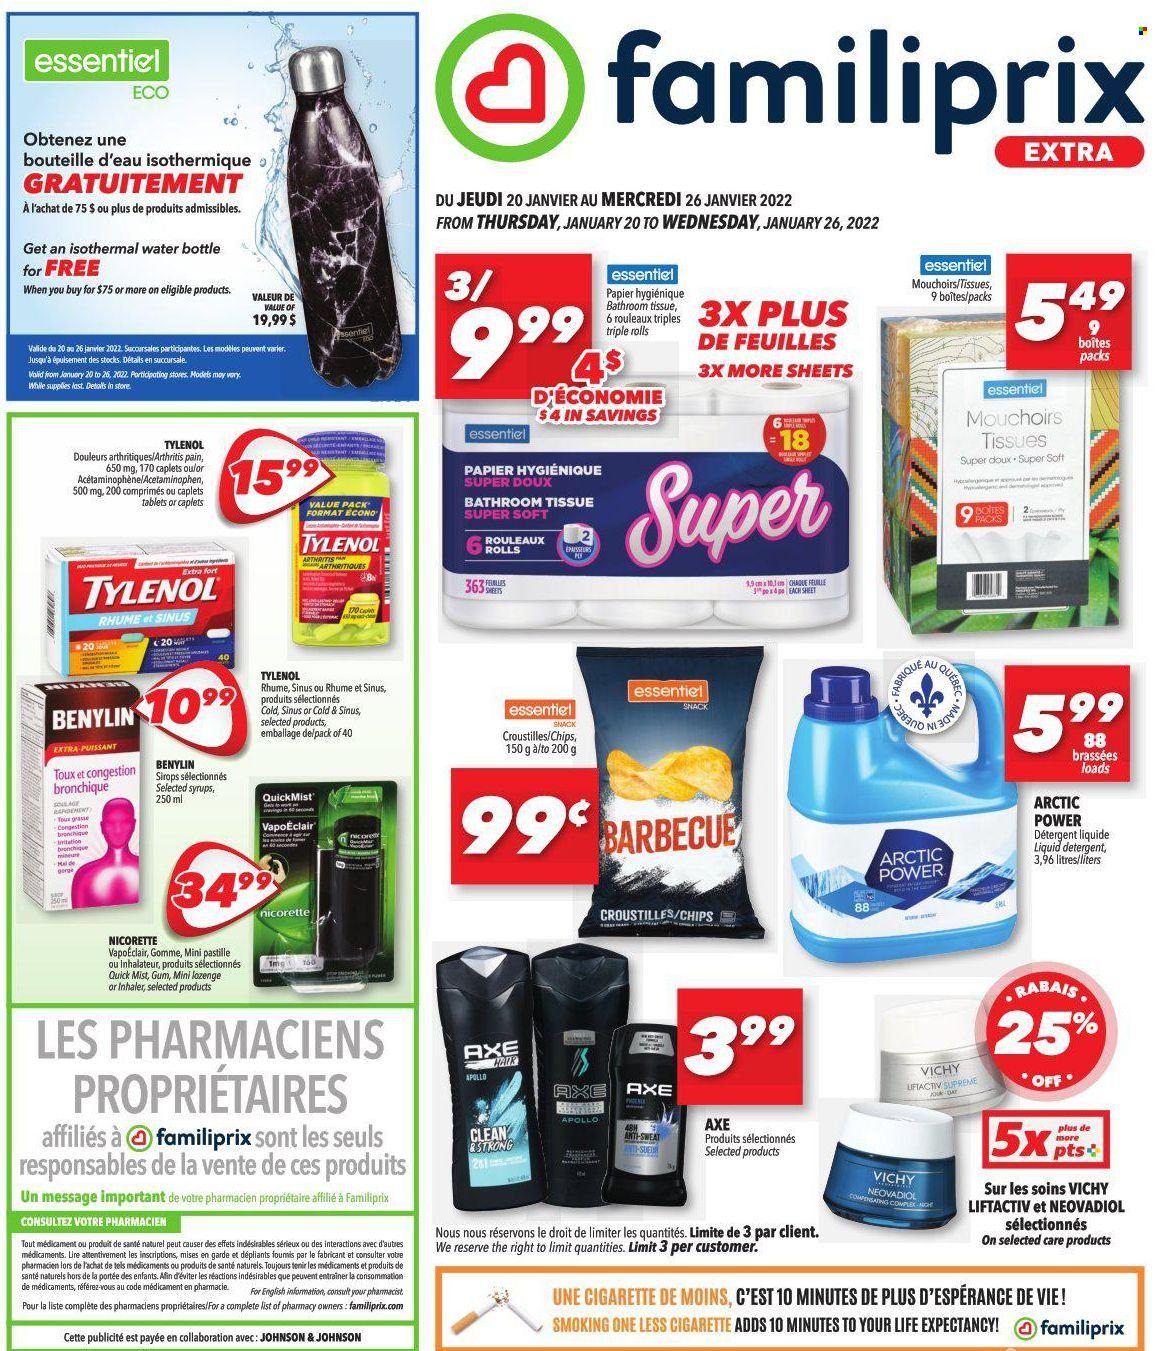 thumbnail - Familiprix Extra Flyer - January 20, 2022 - January 26, 2022 - Sales products - snack, Johnson's, bath tissue, liquid detergent, Vichy, Nicorette, Tylenol, Benylin, detergent, chips. Page 1.